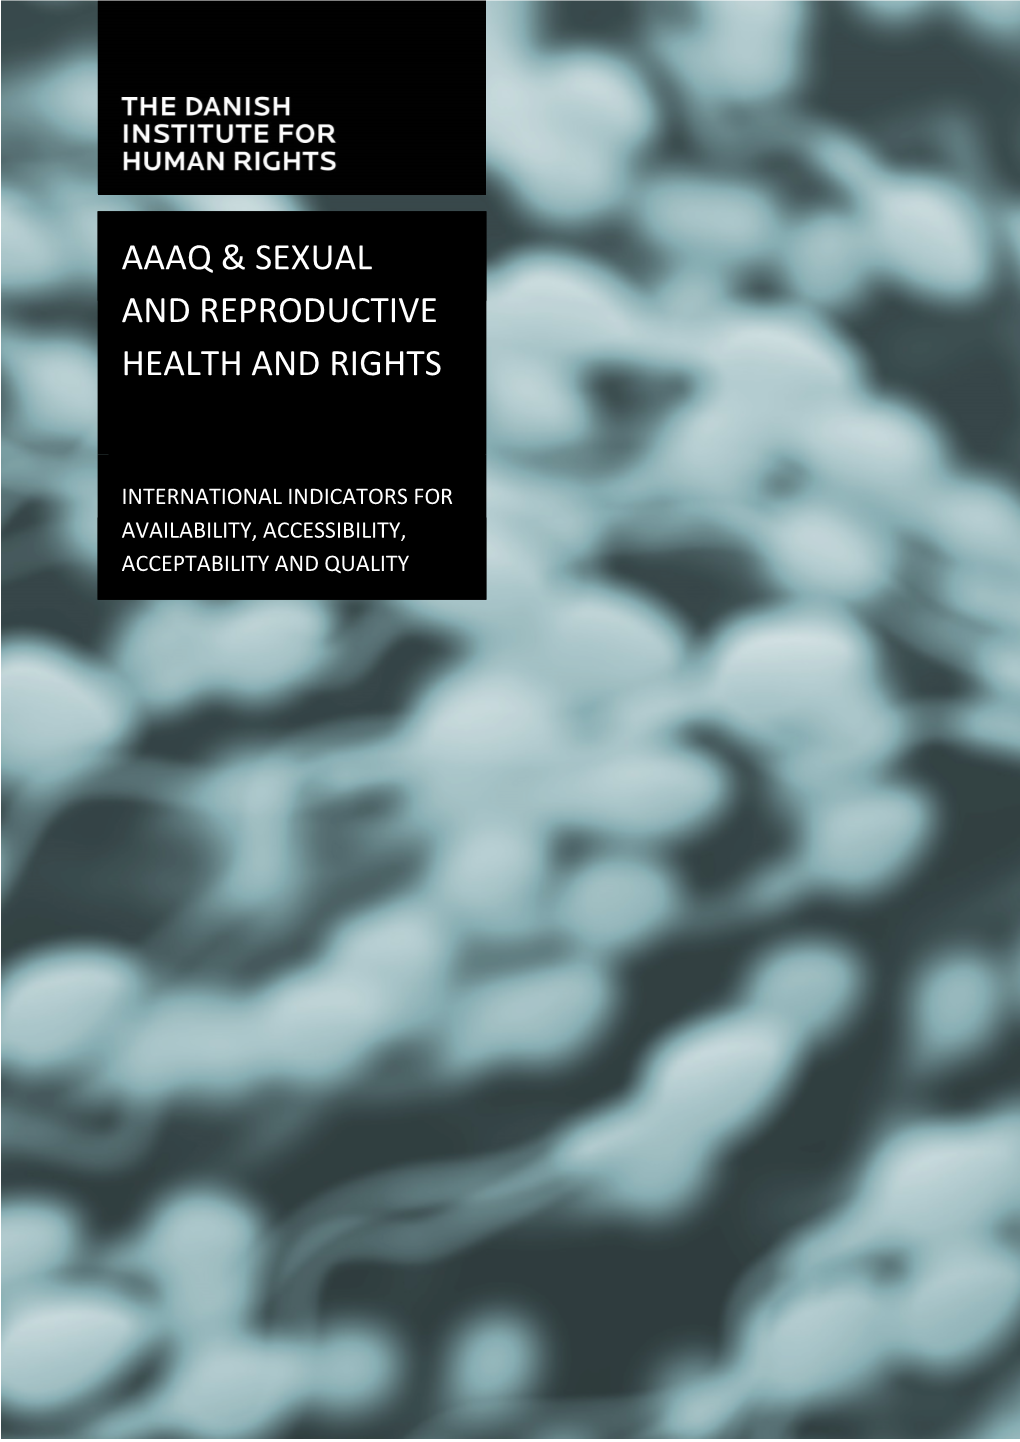 PAPER: AAAQ & Sexual and Reproductive Health and Rights